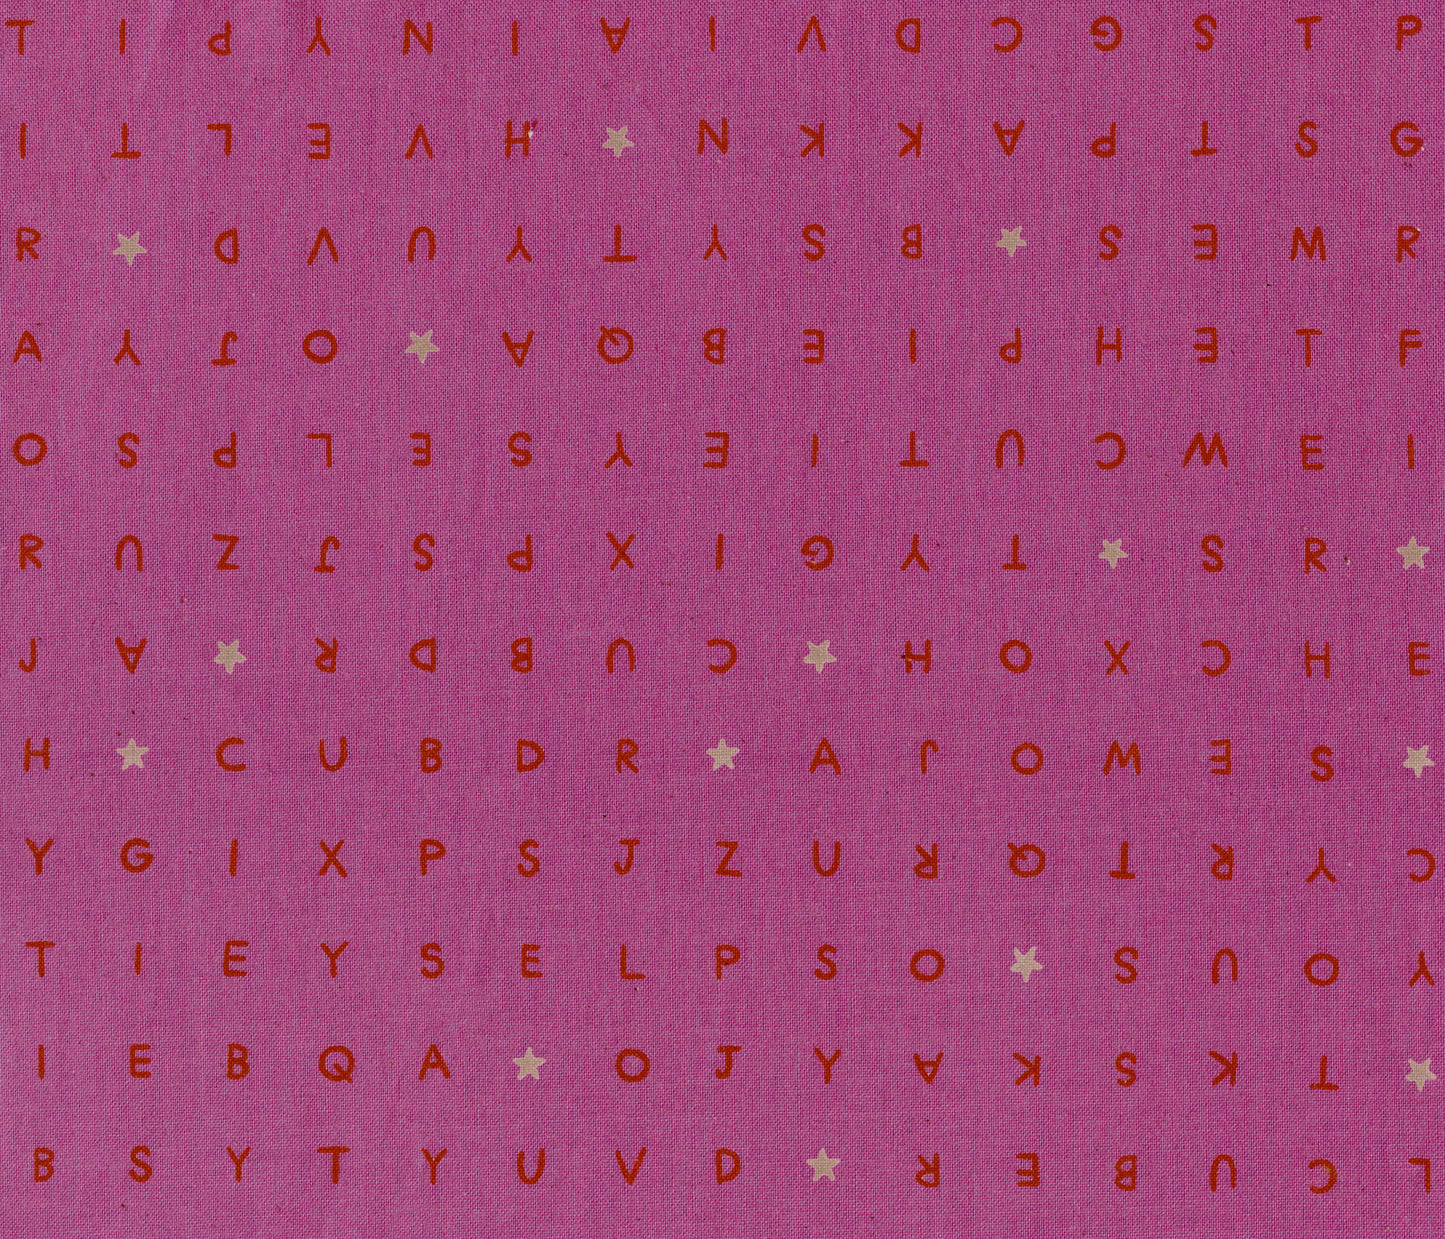 Playful Word Find in Pink Cotton + Steel